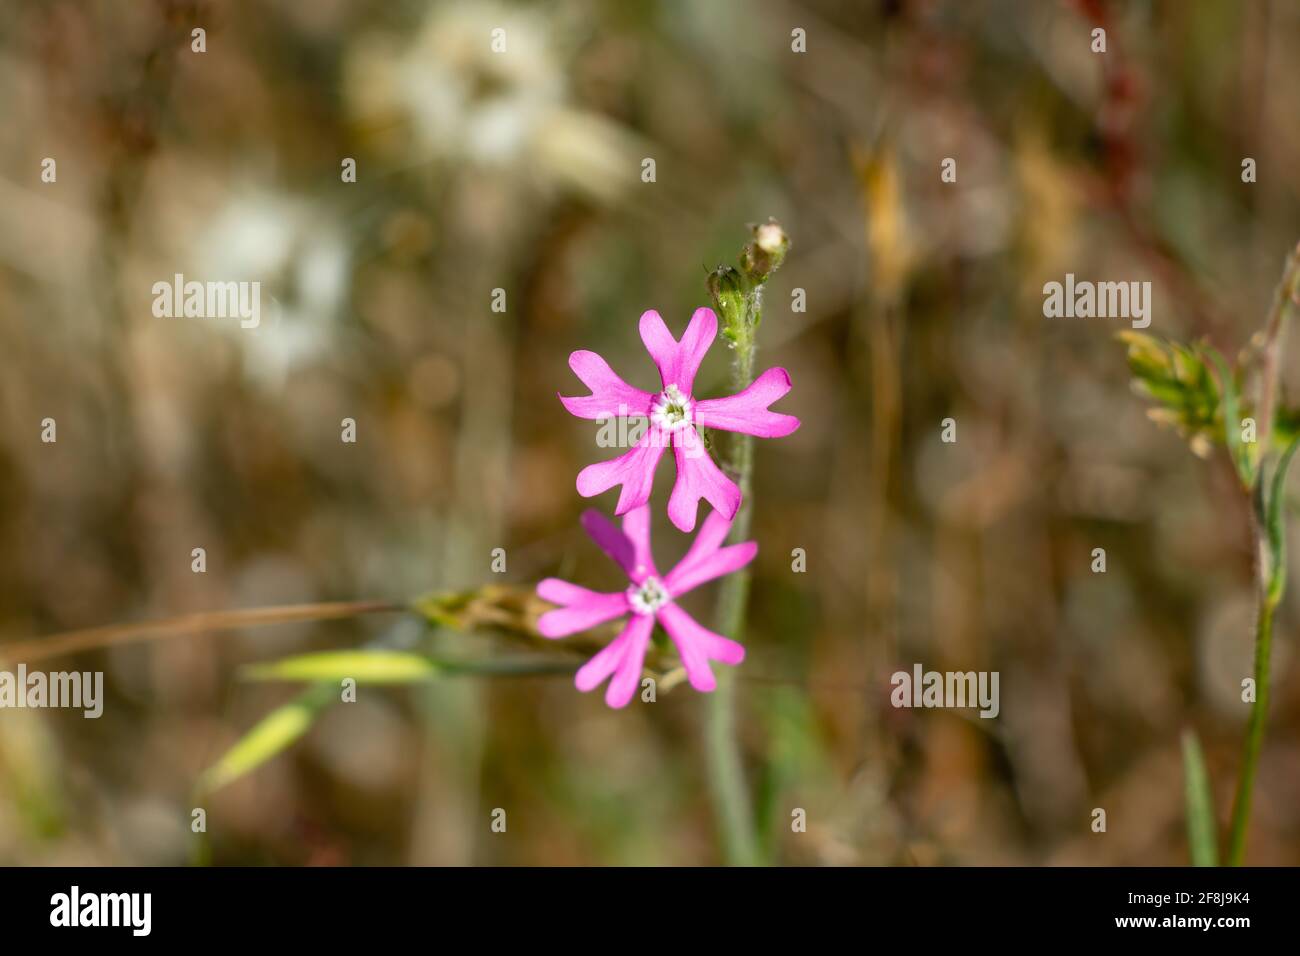 Silene colorata or Silene scabriflora is a species that belongs to the Caryophyllaceae family. It is distributed throughout the Iberian Peninsula. Stock Photo